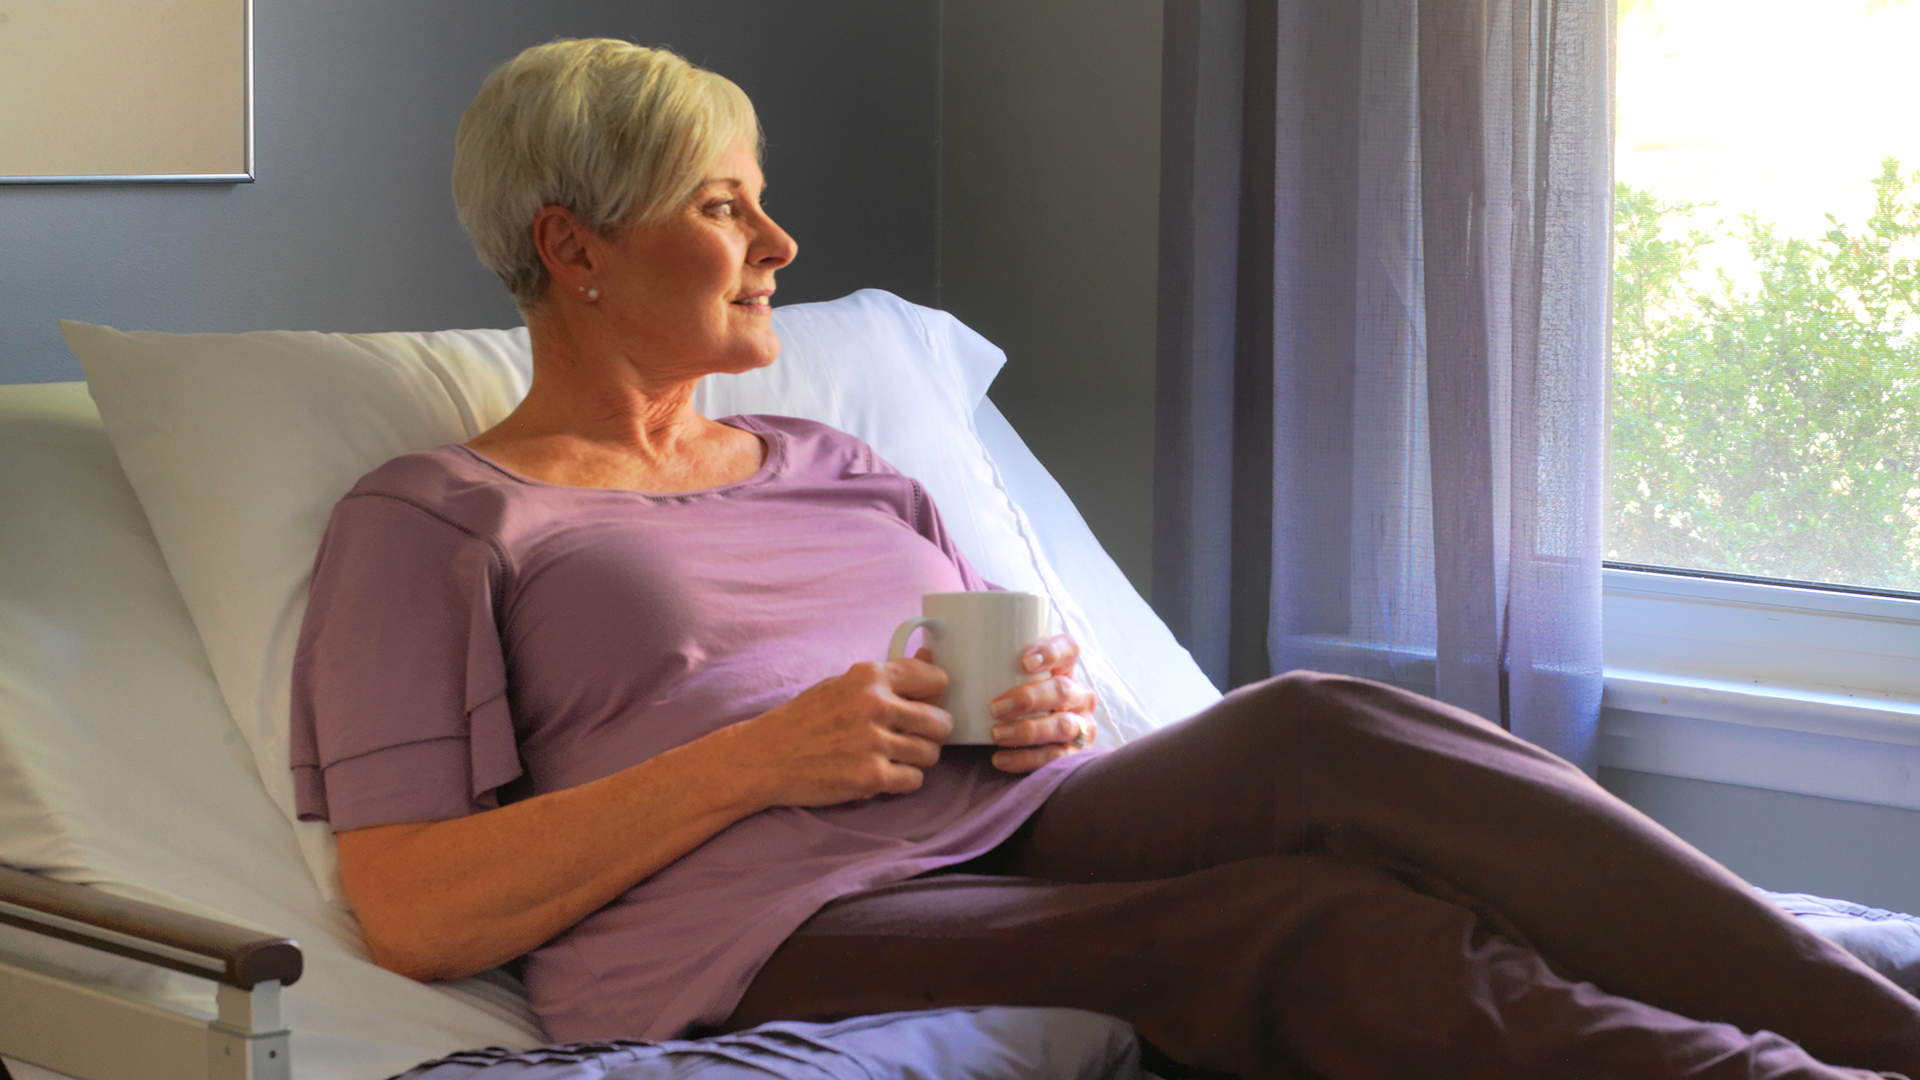 Mature woman with short gray hair smiling, sitting in a hospital bed by a window, holding a white cup.